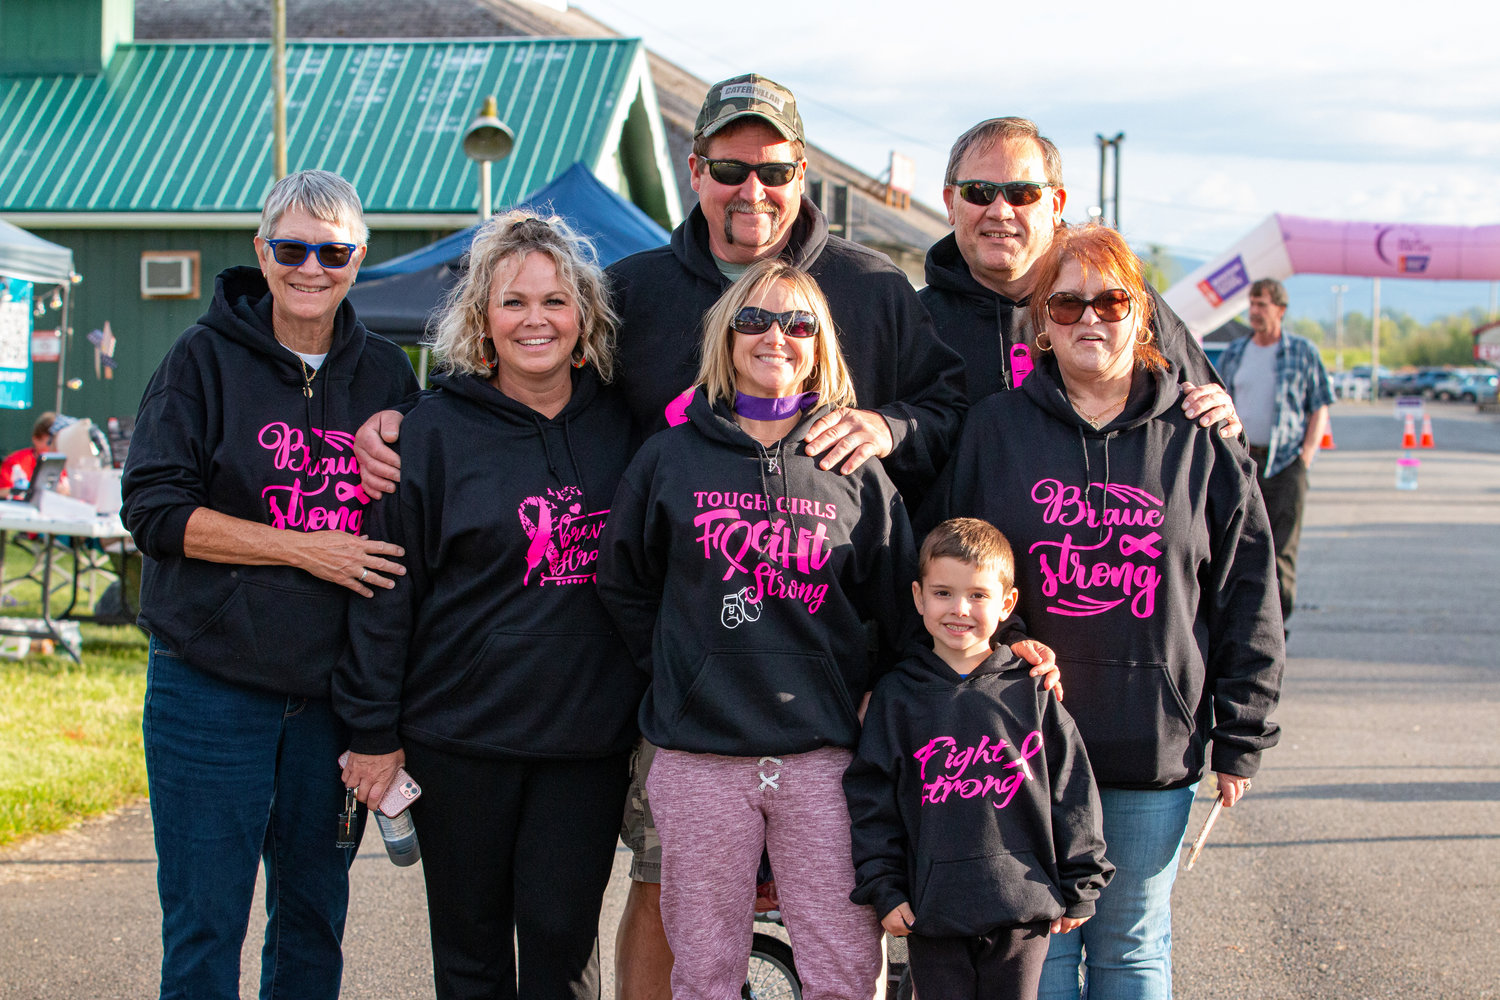 The Young family poses for a photo at the Relay for Life event at the Southwest Washington Fairgrounds Friday evening.